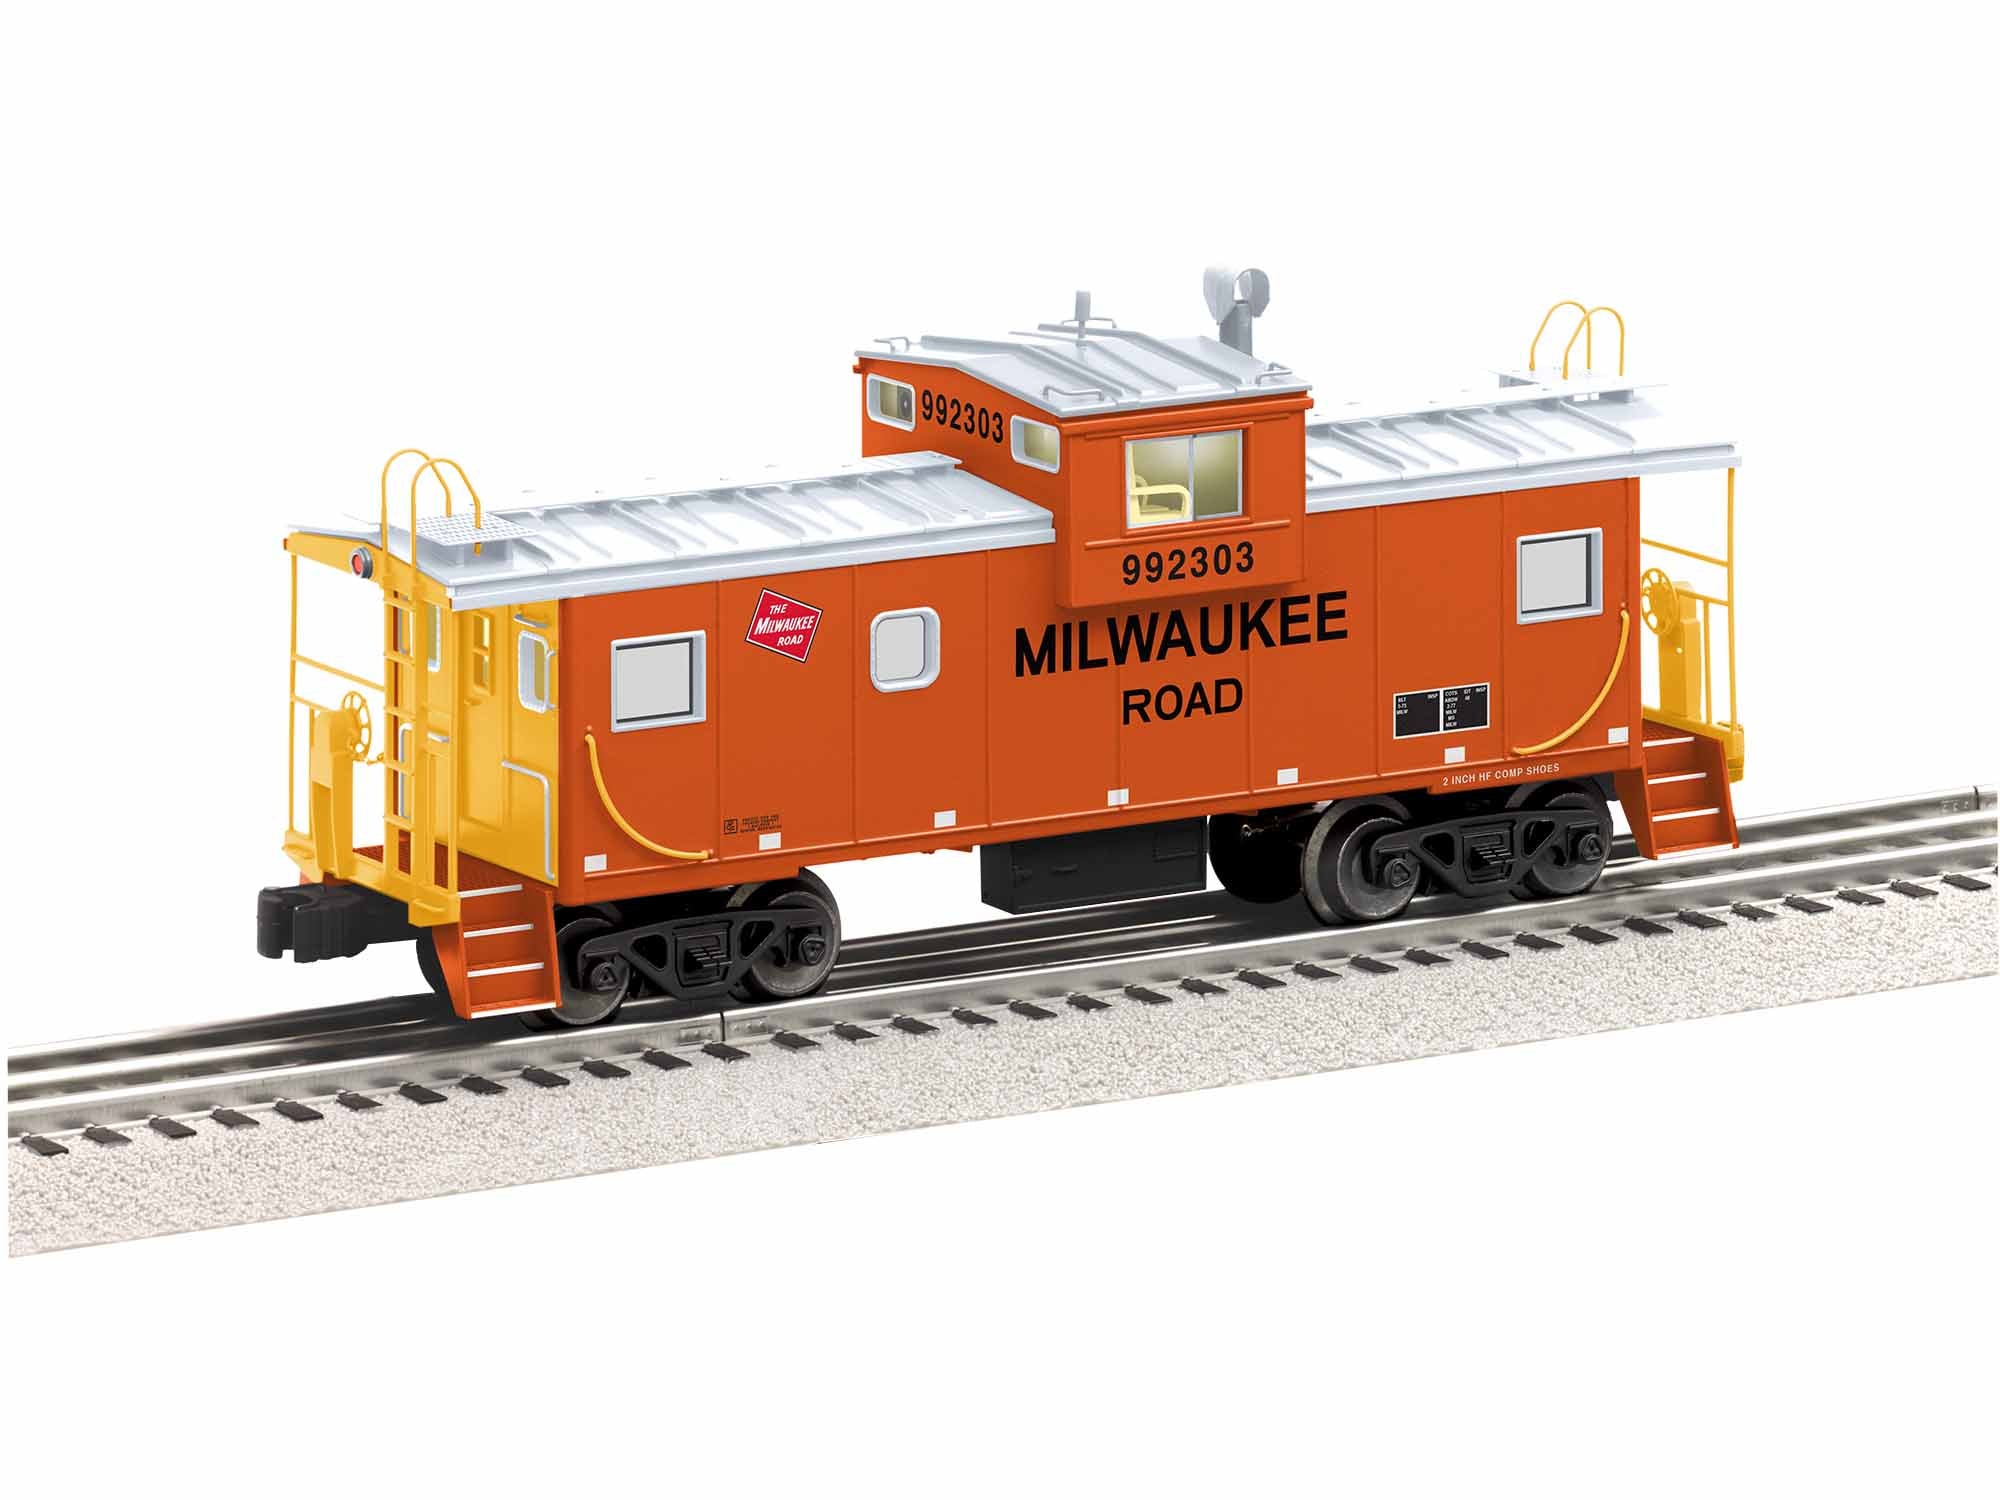 Lionel # 1926930 Milwaukee Road Extended Vision CupolaCam Caboose #992303